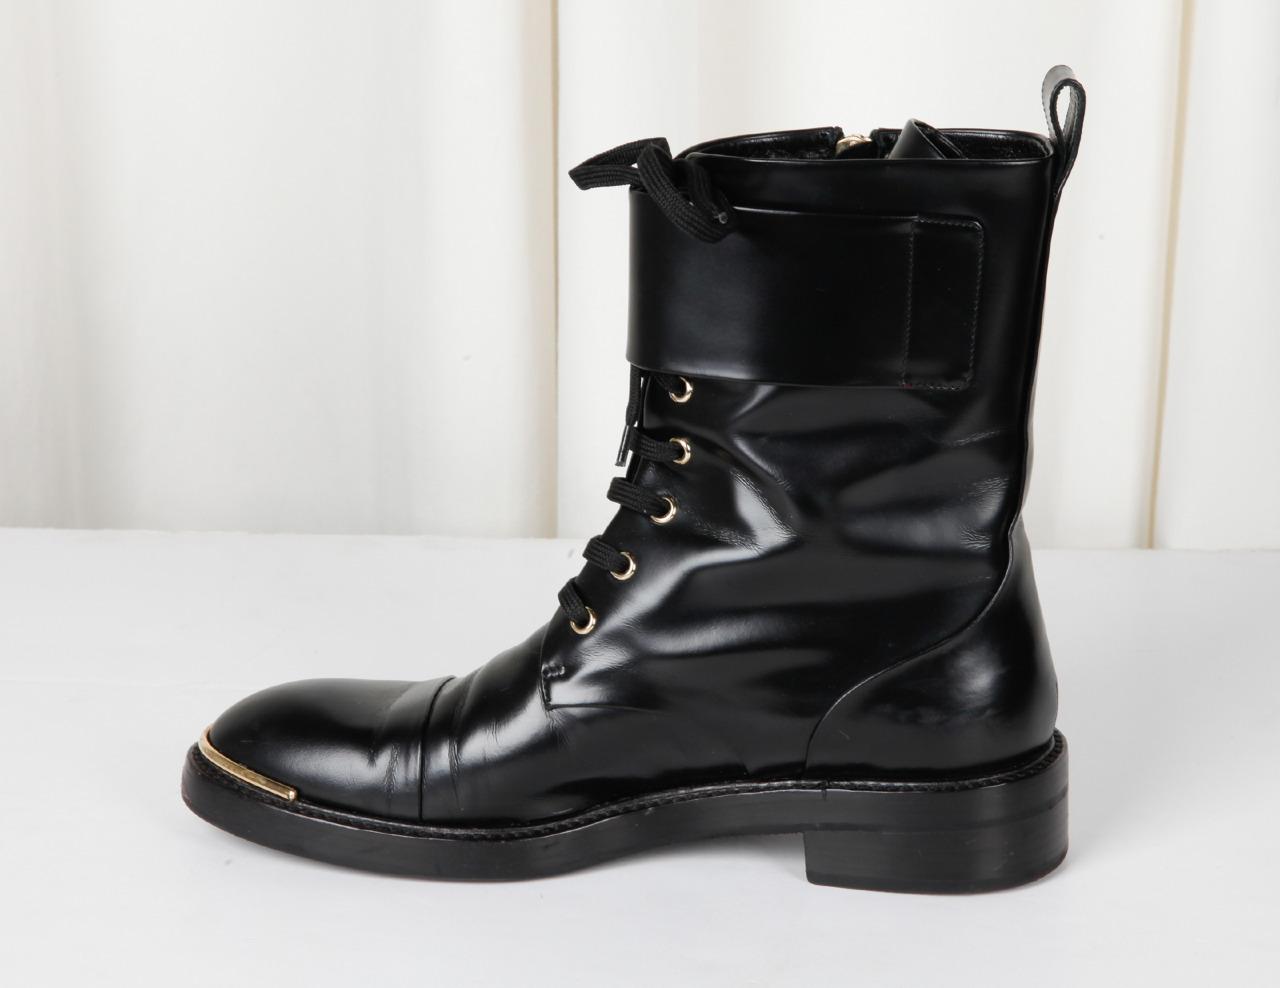 LOUIS VUITTON Womens Casual Black Leather Lace-Up Ankle Low Heel Boots 8-38 | eBay